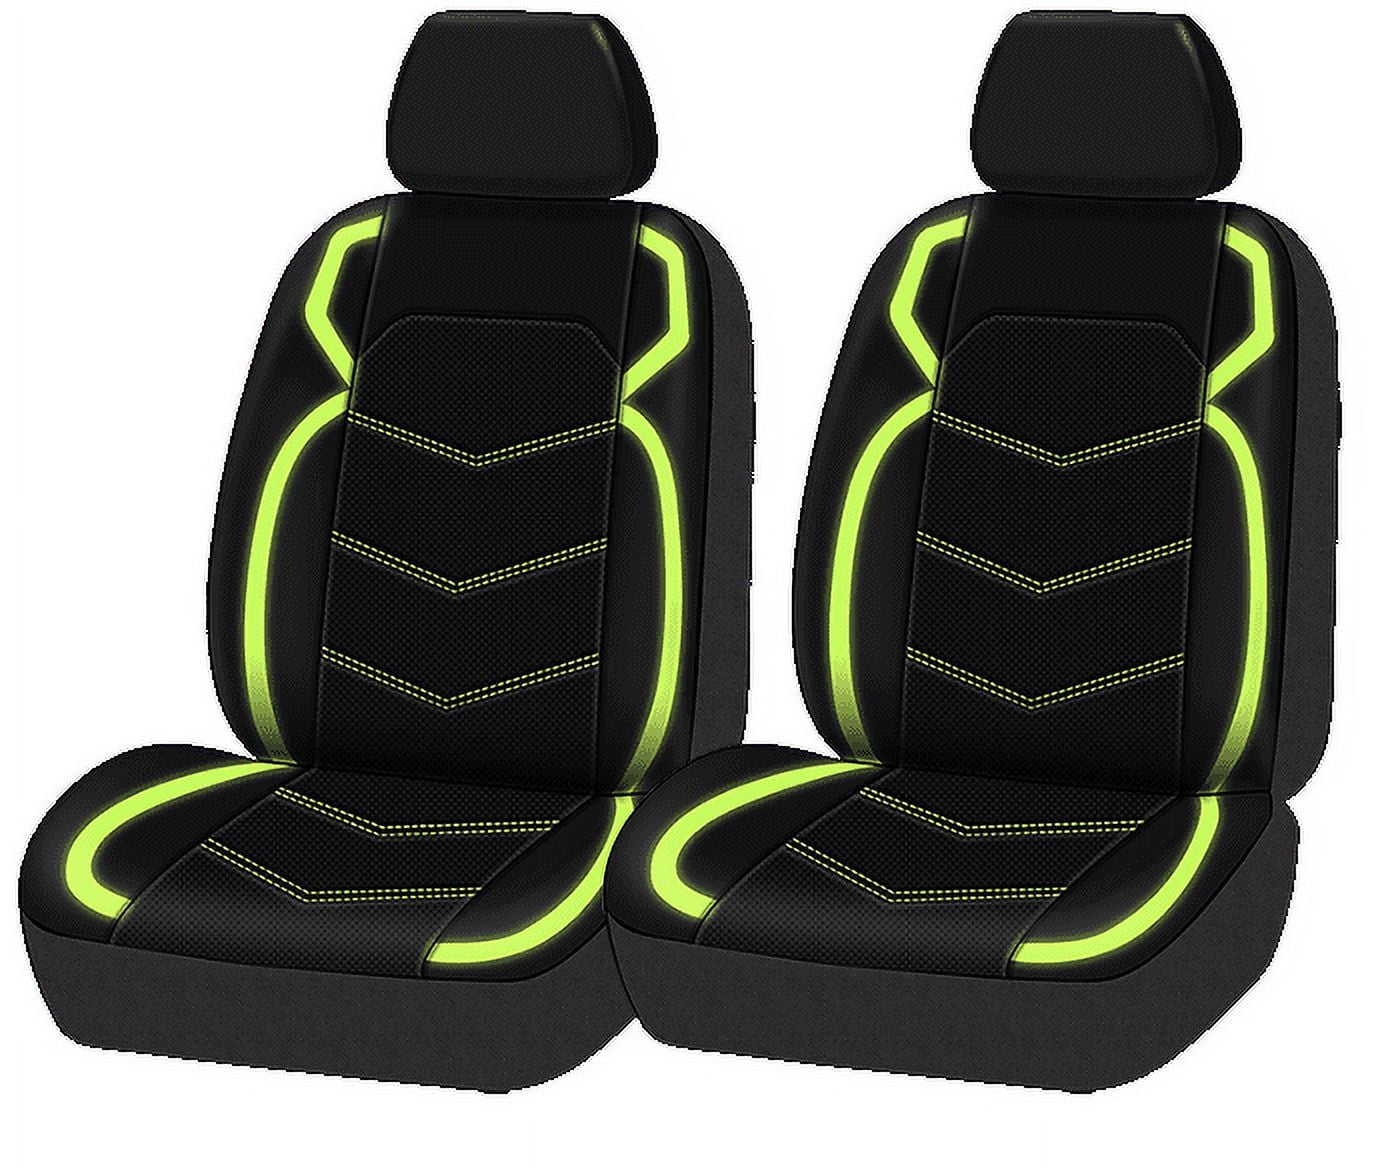 Motor Trend Car Seat Cushion, 2 Pack - Diamond Stitched Faux Leather Seat  Covers for Cars Trucks SUV, Black Padded Car Seat Covers with Storage